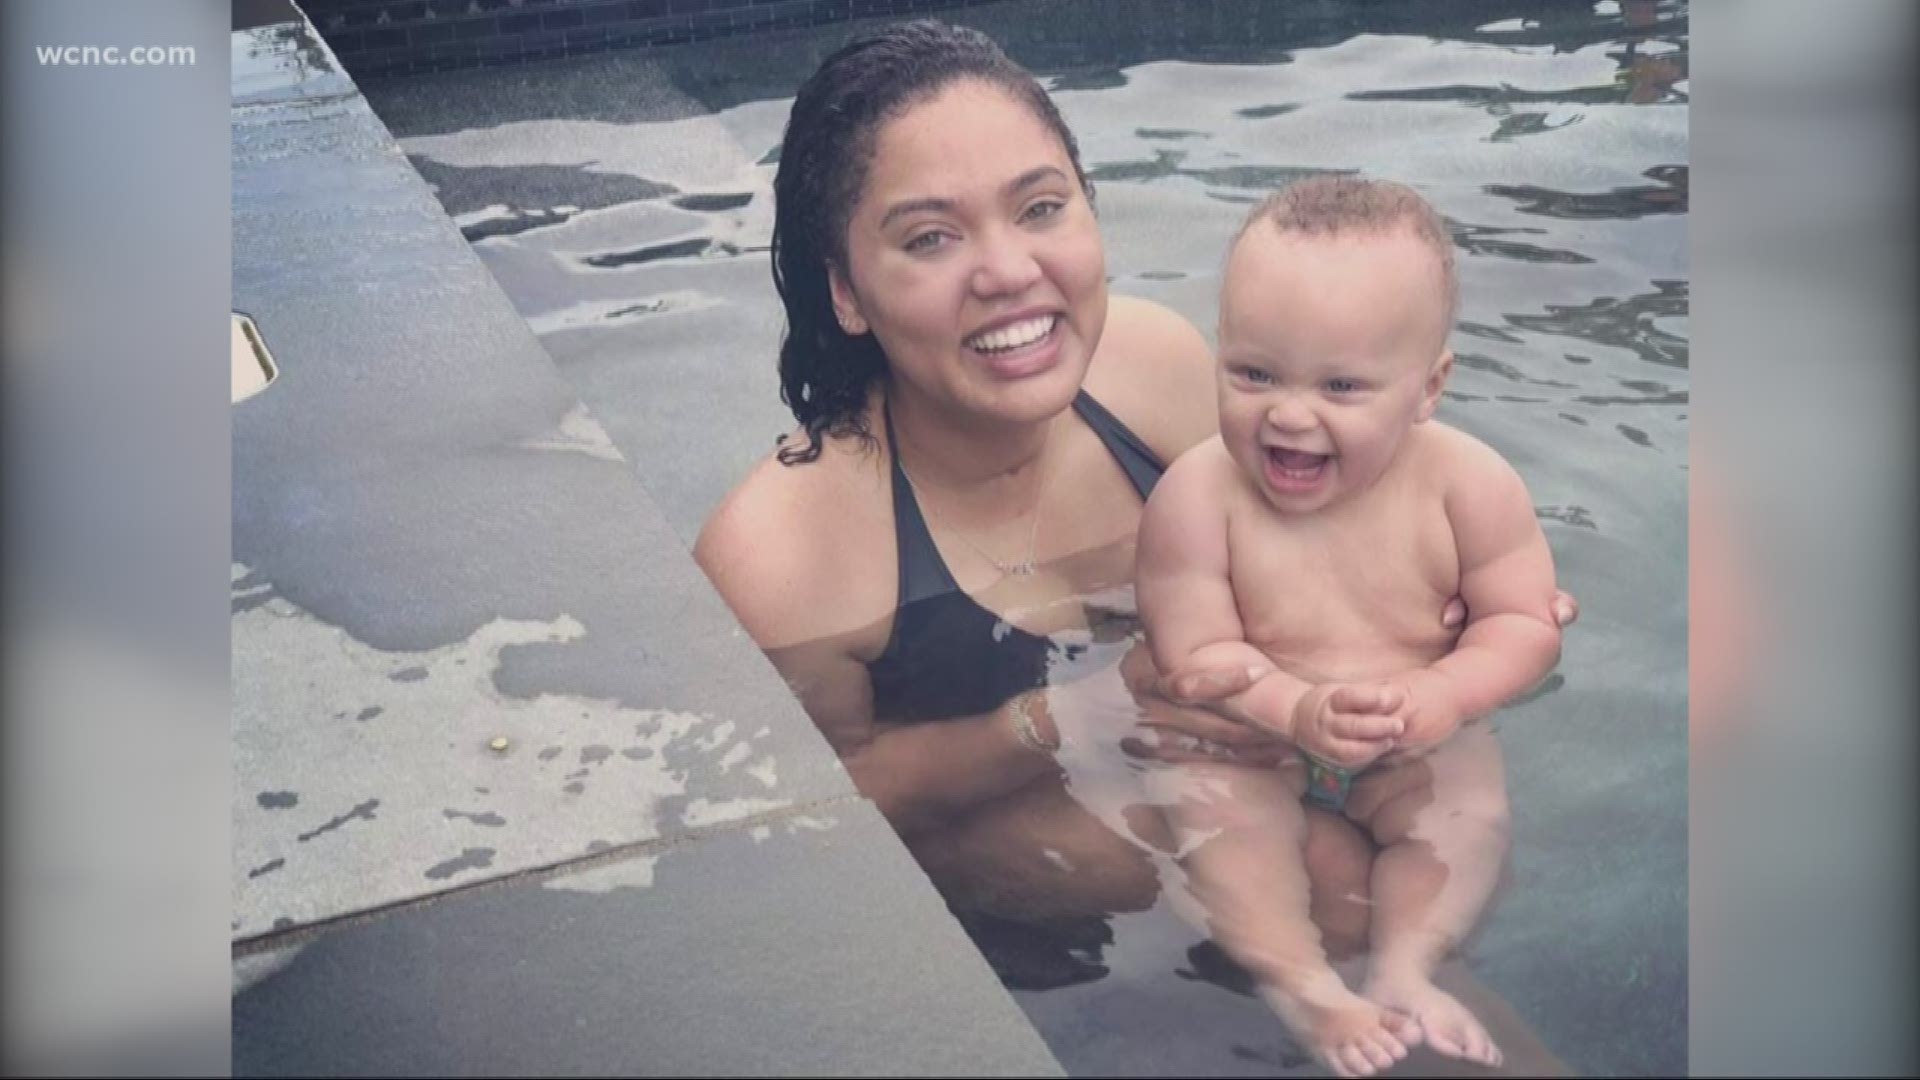 Whatever you do, don't mess with Ayesha Curry. The celebrity cook and wife of NBA star Steph Curry clapped back at trolls who body-shamed her and her infant son on social media.